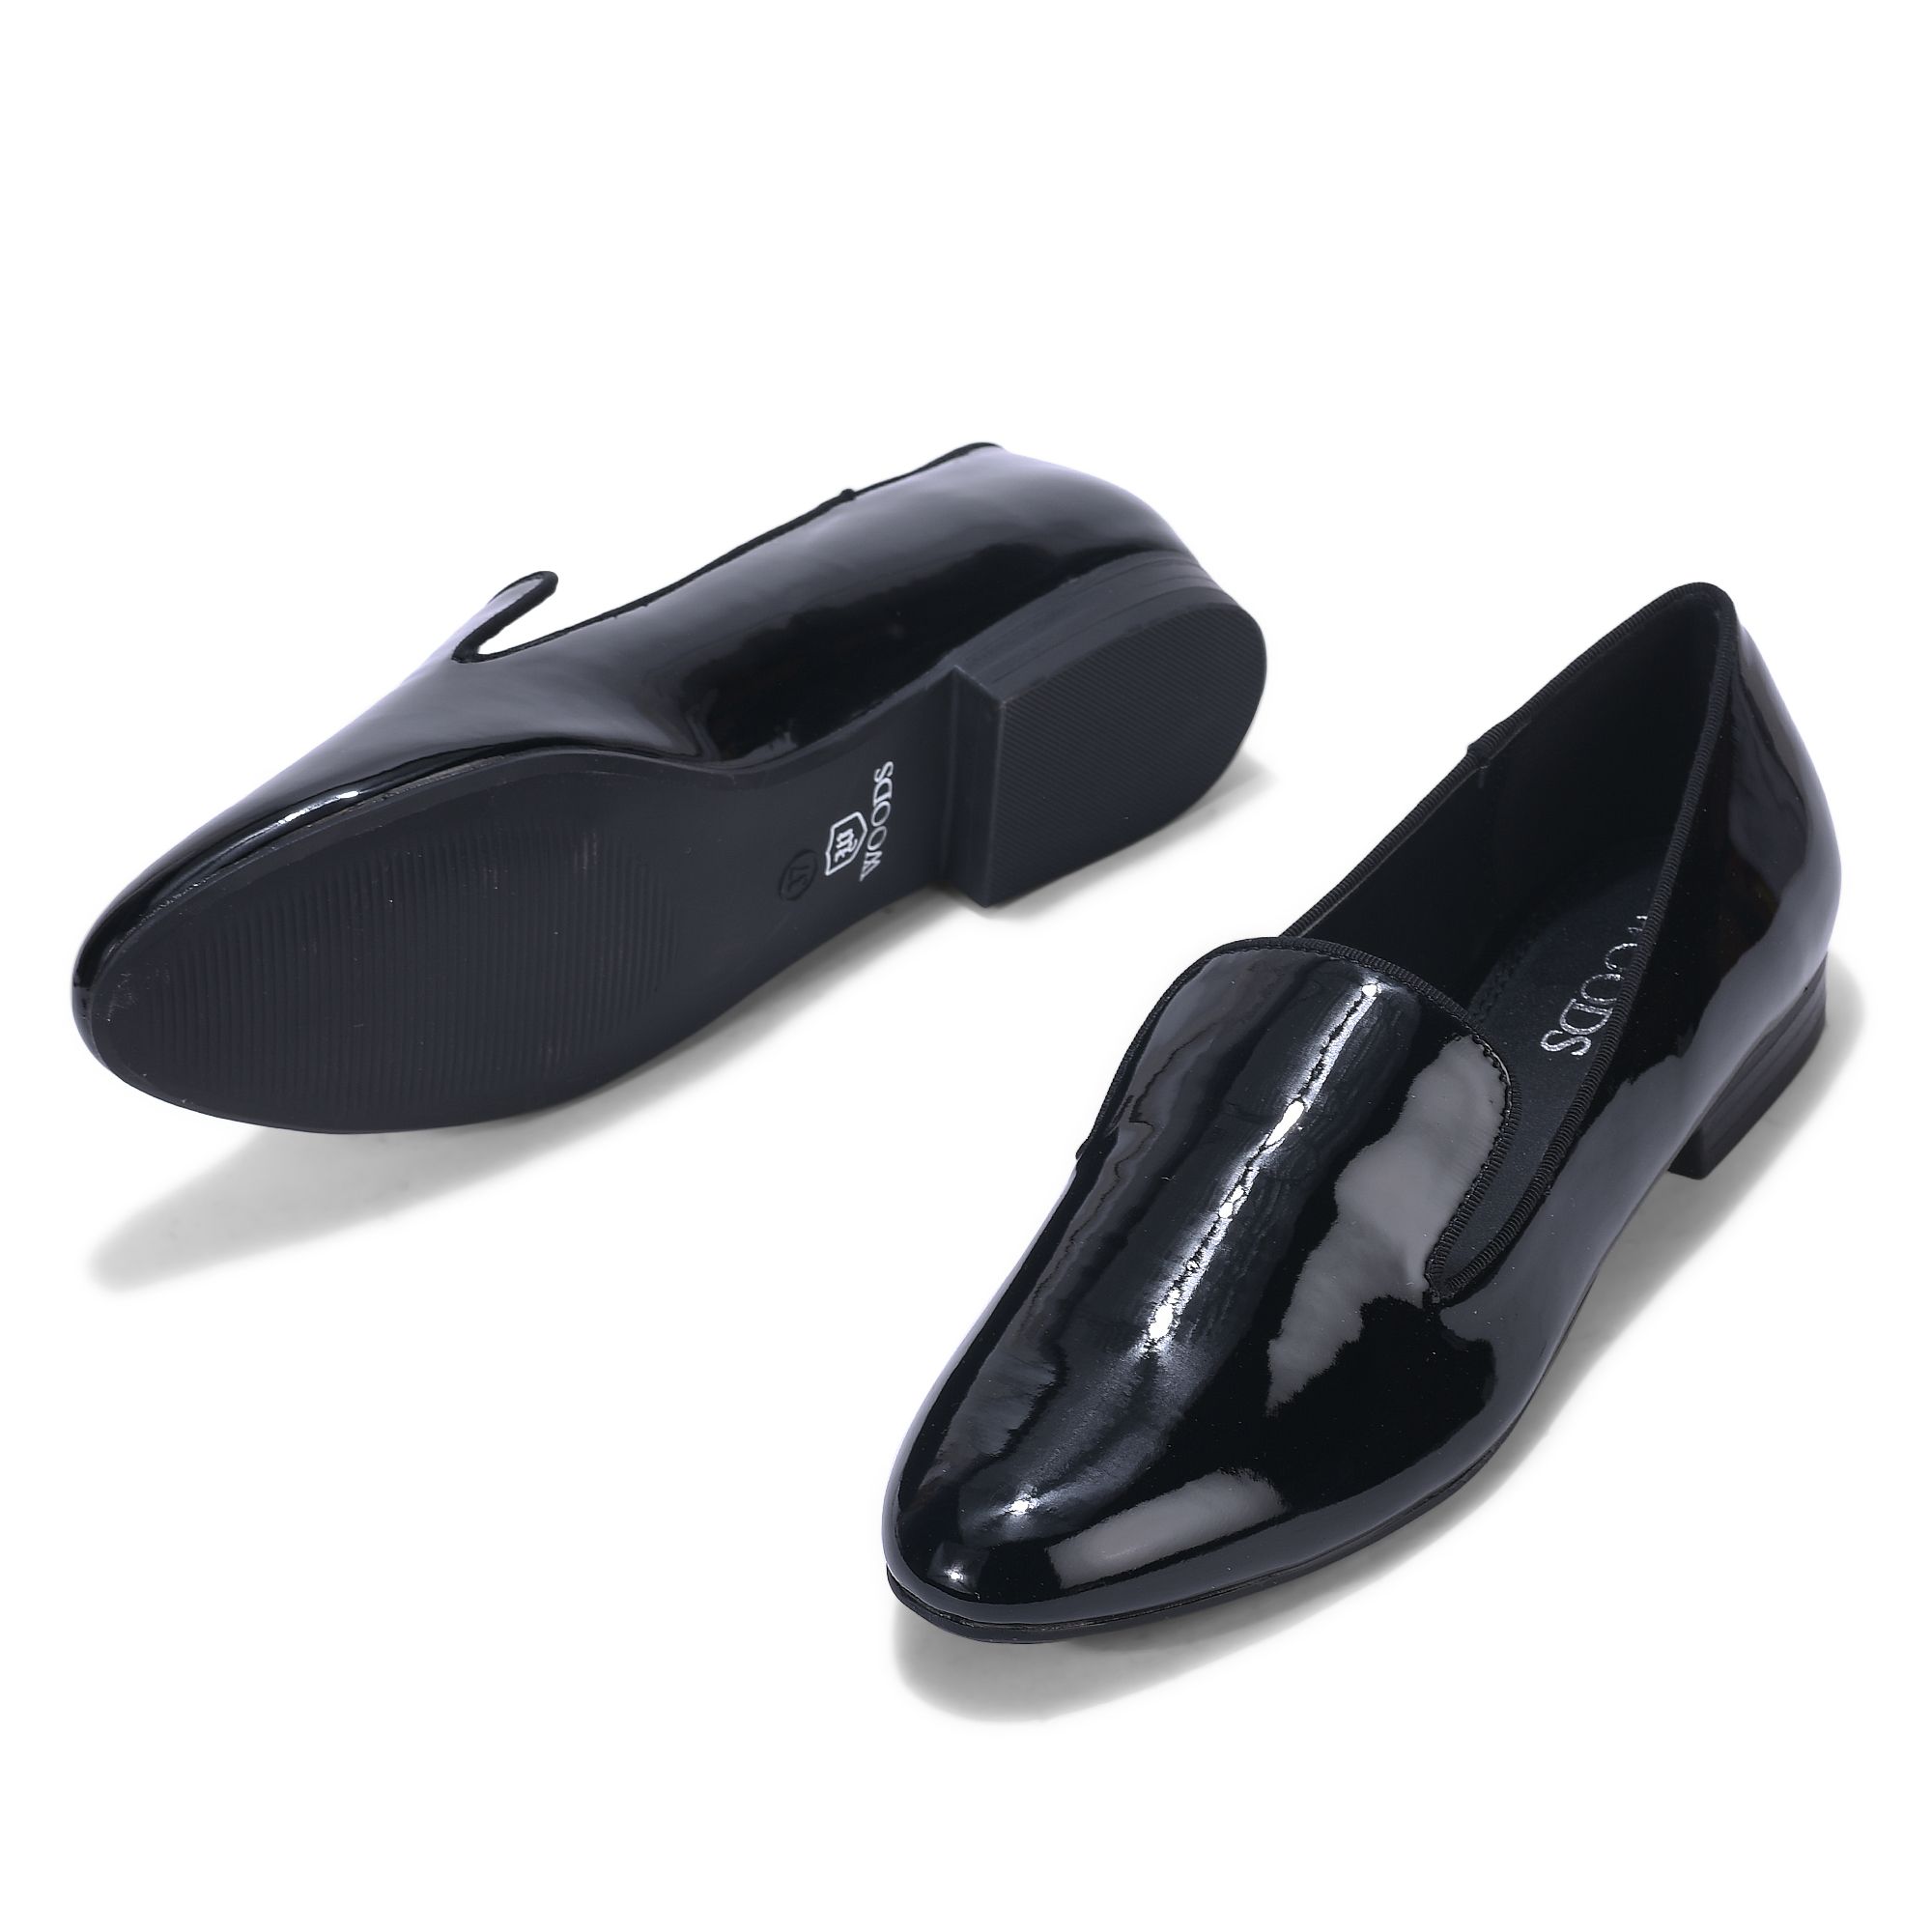 Black casual loafer for women